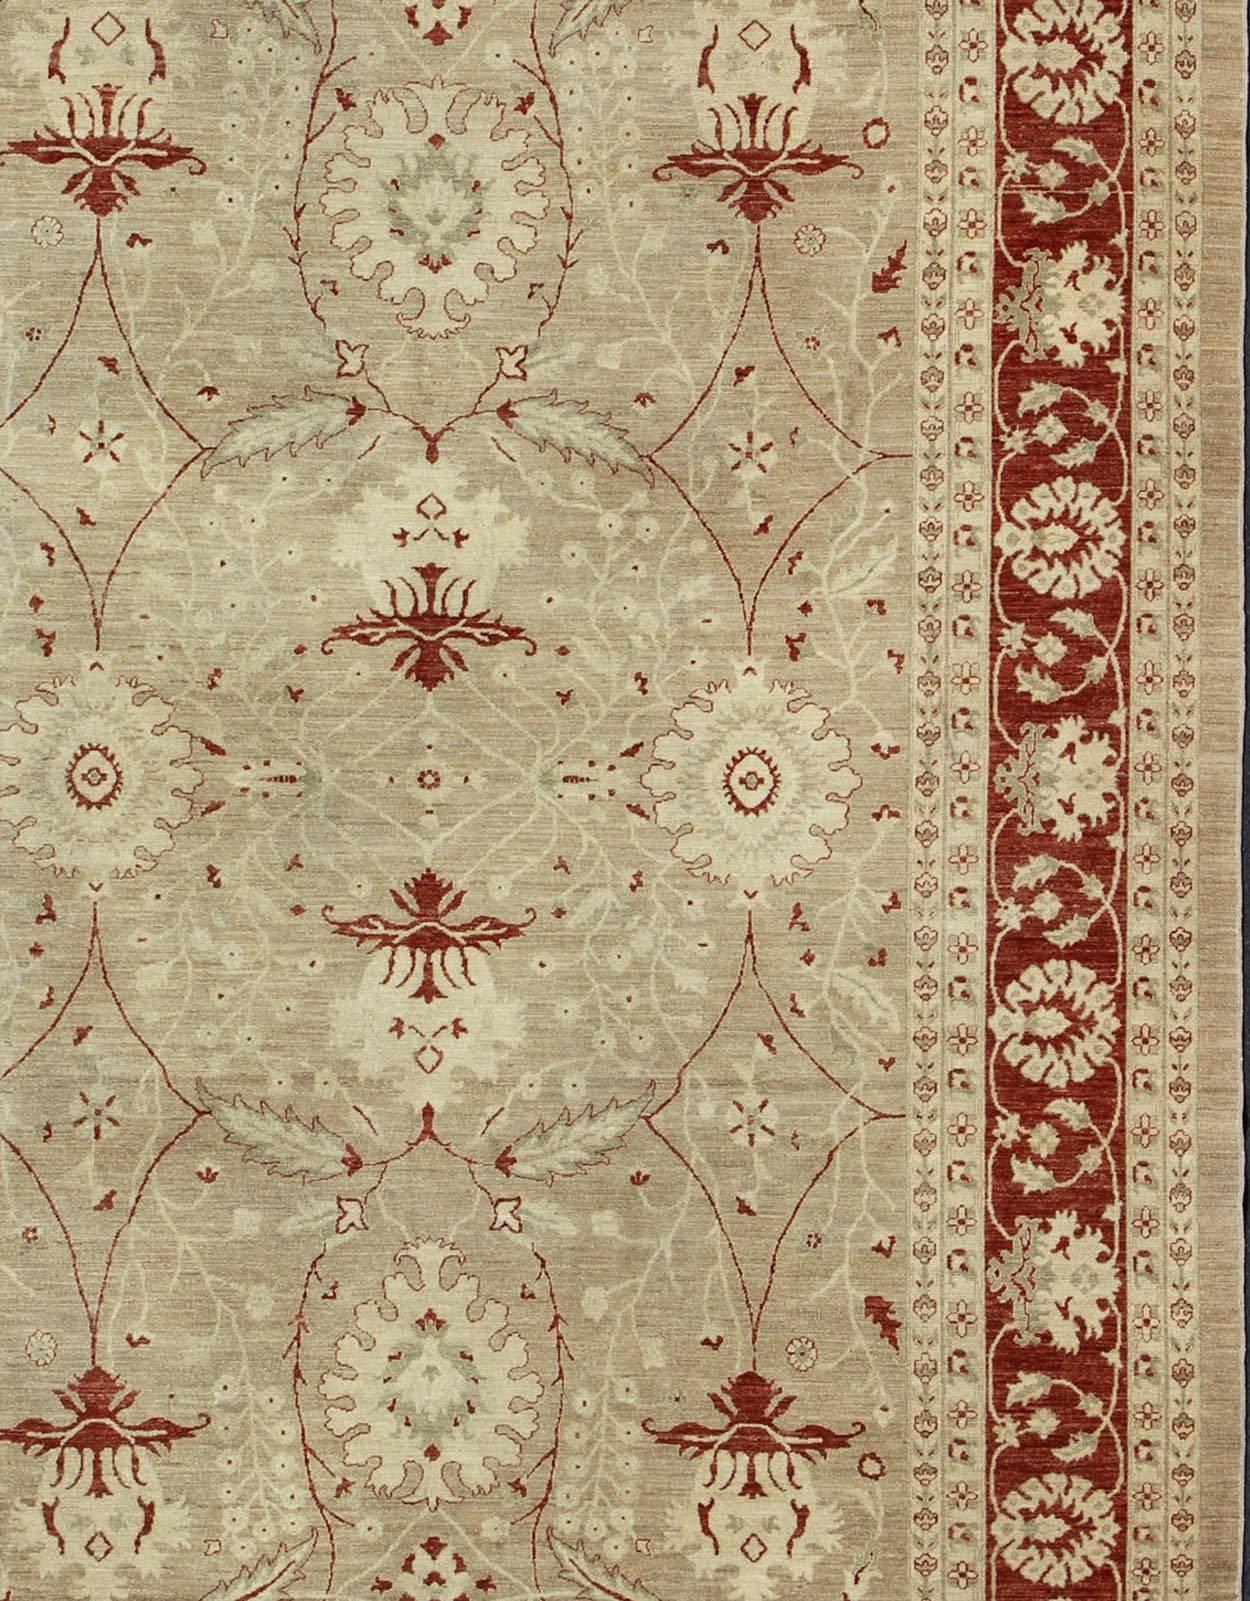 Hand-Knotted Sultanabad Design Rug with Stylized Design in Light Camel, Cream & Garnet Red For Sale